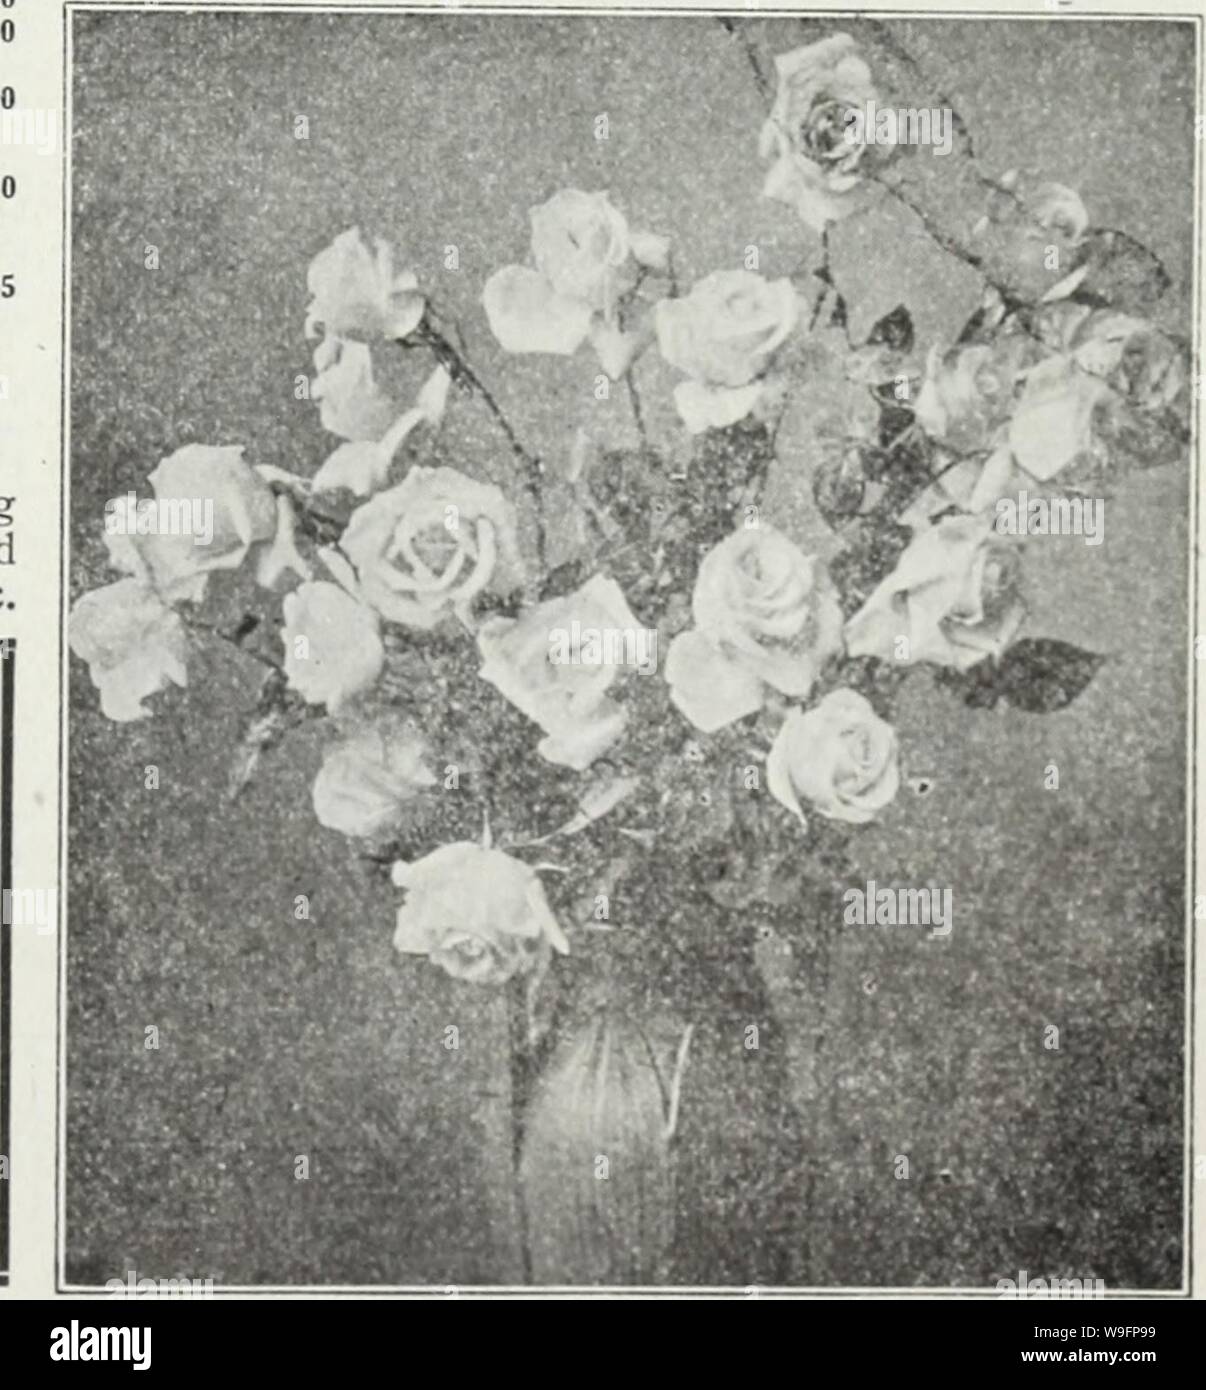 Archive image from page 60 of Currie's farm and garden annual. Currie's farm and garden annual : spring 1930  curriesfarmgarde19curr Year: 1930 ( Giant Flowering Zinnia. WALLFLOWER (GOLDLACK) Popular half-hardy perennials, greatly esteemed for their delightfully fragrant flowers. Pkt. Belvoir Castle--Single yellow $0.10 Blood Red—Single, deep red 10 Single, Finest Mixed 10 Double, Finest Mixed 10 Early Parisian—A new annual flowering variety, with beautiful single flowers, deliciously fragrant; mixed colors 10 (Siberian Wallflower) See Cheiranthus, page 7 $0.10 ZEA JAPONICA Dwarf ornamental Co Stock Photo